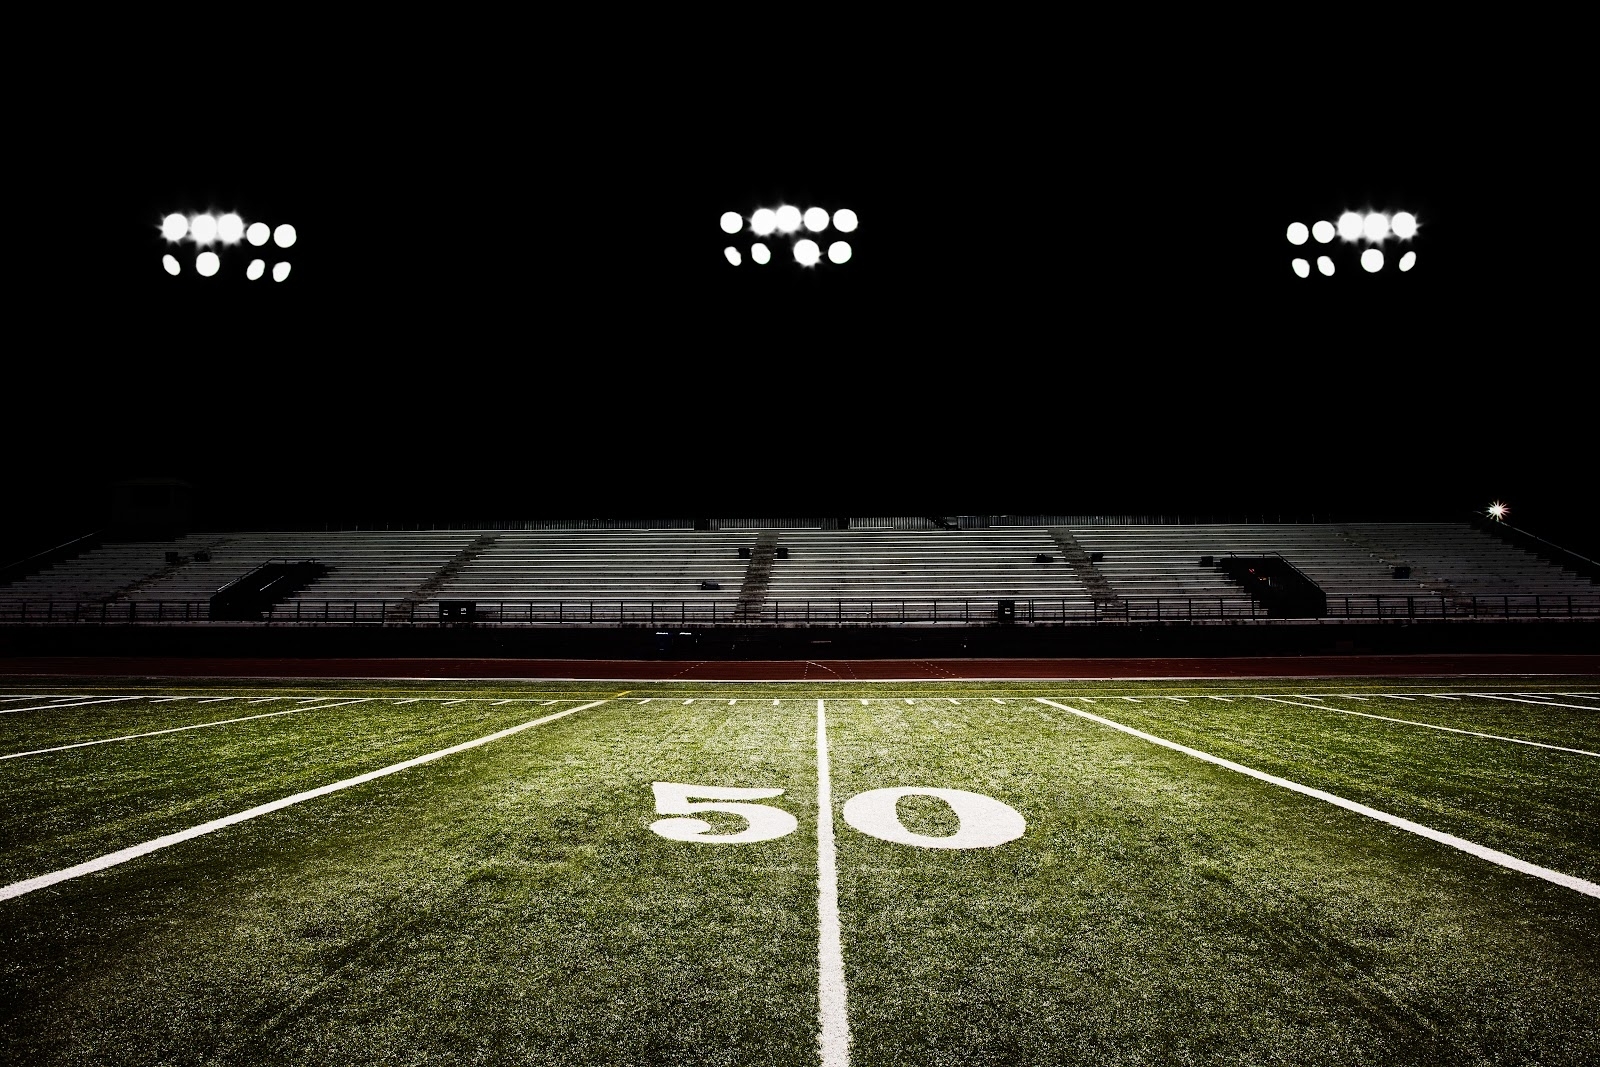 10 Top American Football Field Backgrounds At Night FULL HD 1080p For PC Desktop